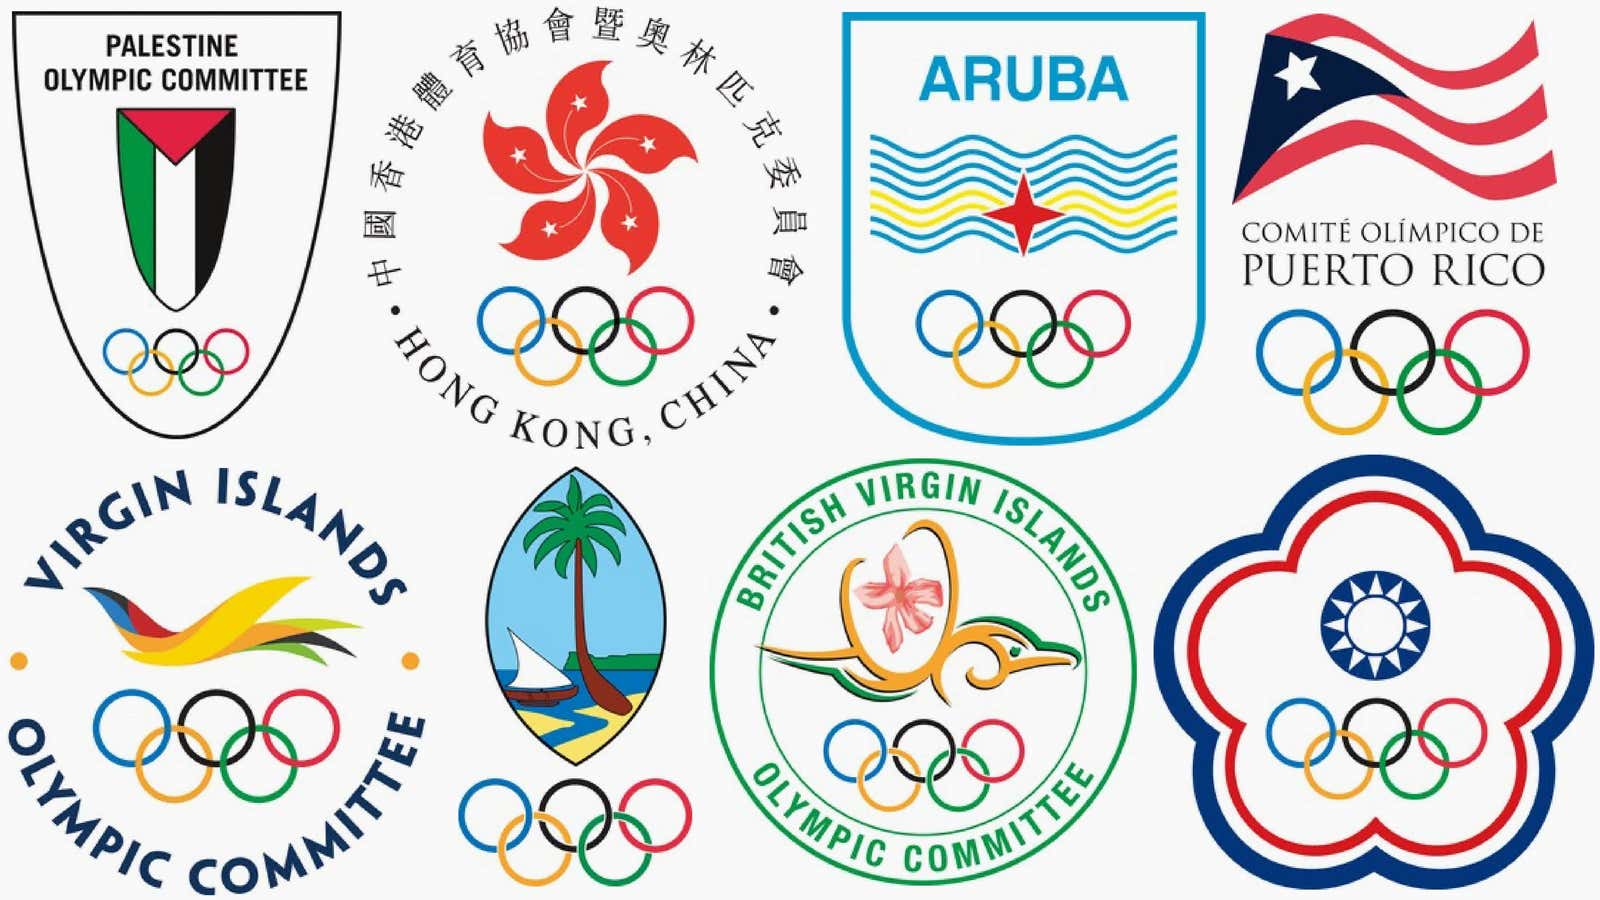 The world has 193 countries, so why are there 205 teams in the Olympics?